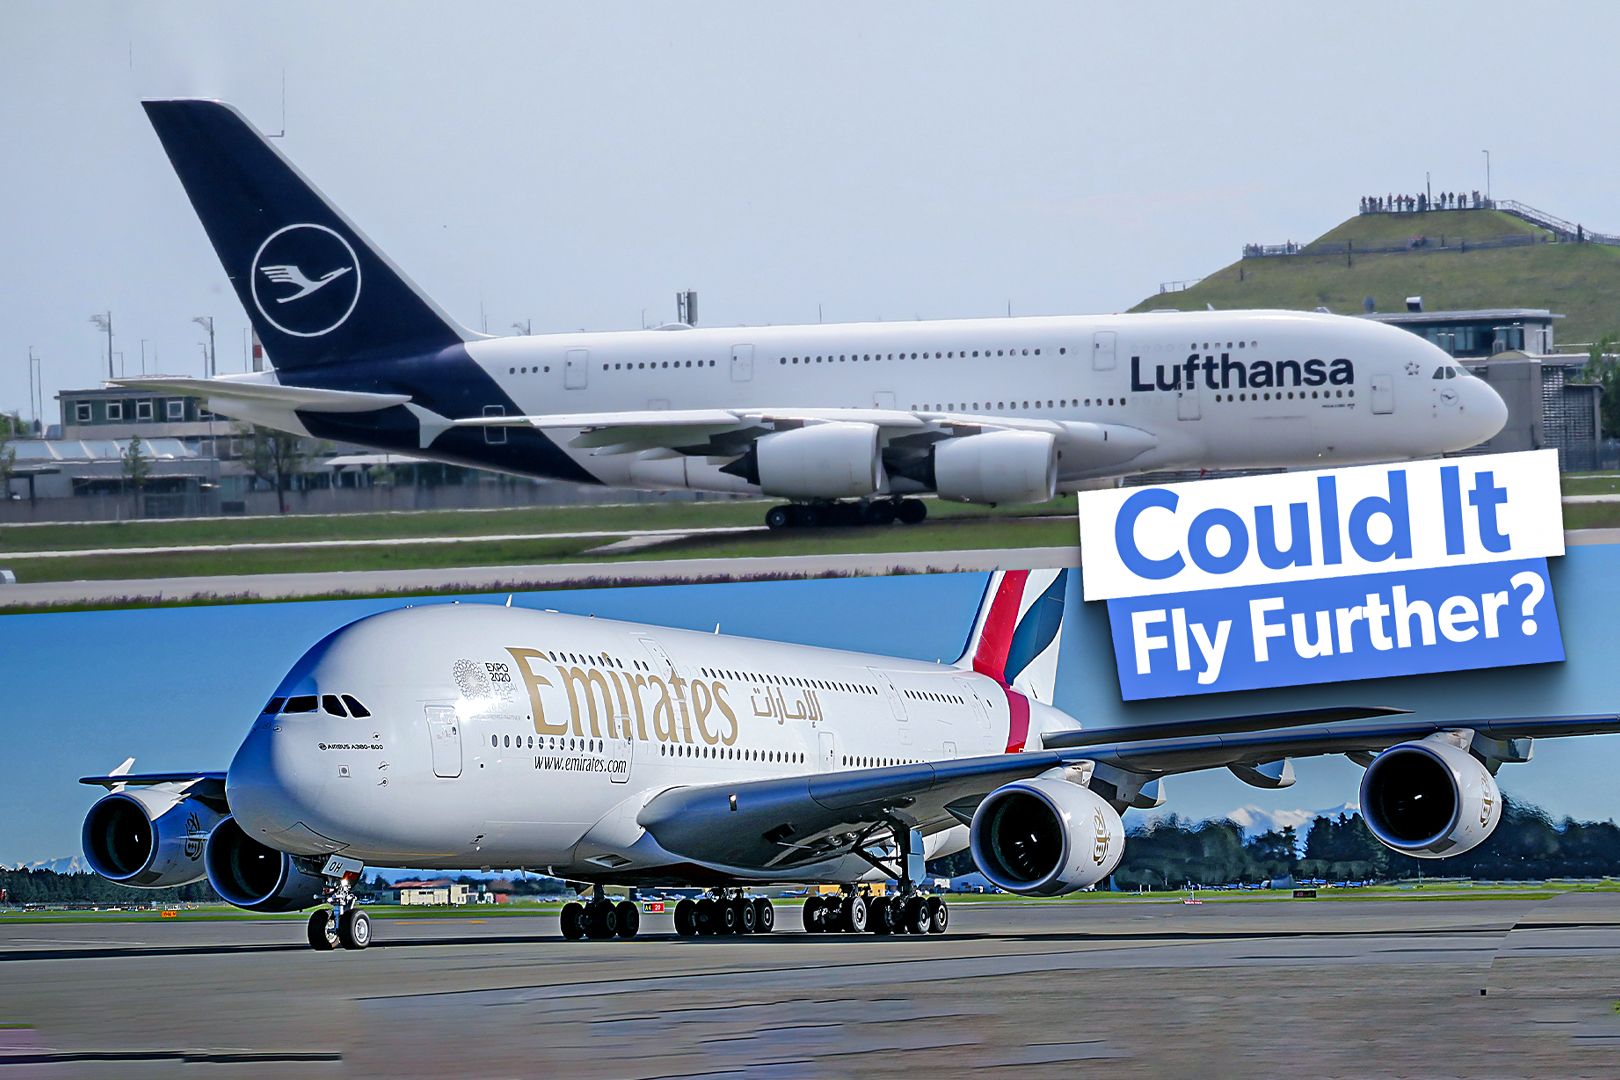 Two Airbus A380s